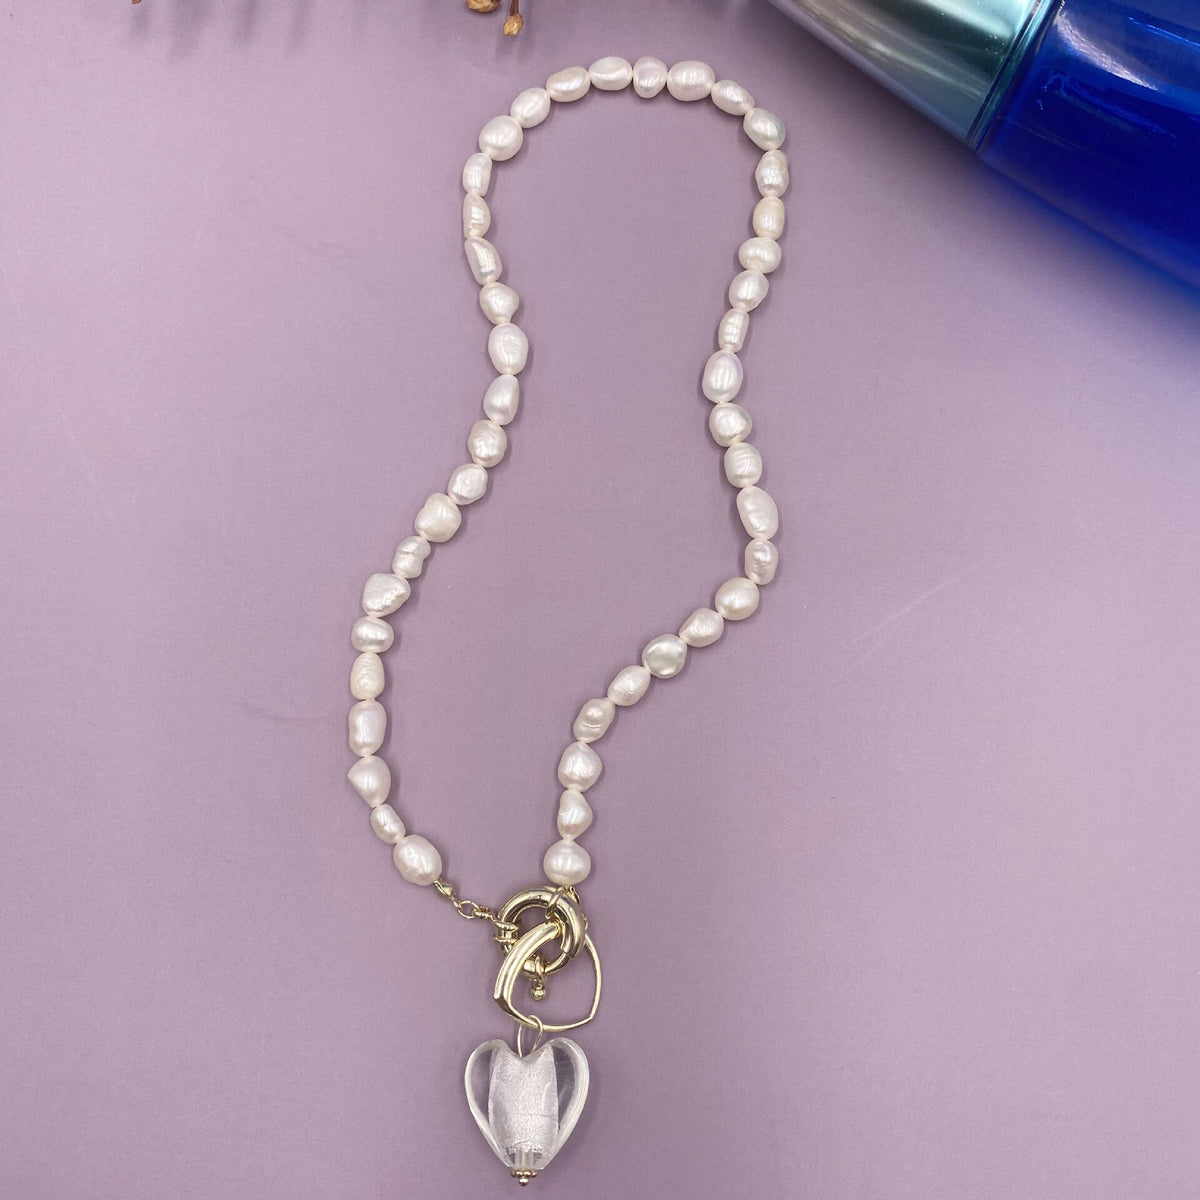 Vintage Baroque Irregular Natural Pearl Necklaces for Women Girl Blue Color Heart Linked Chain Pendant Chokers Necklace Jewelry